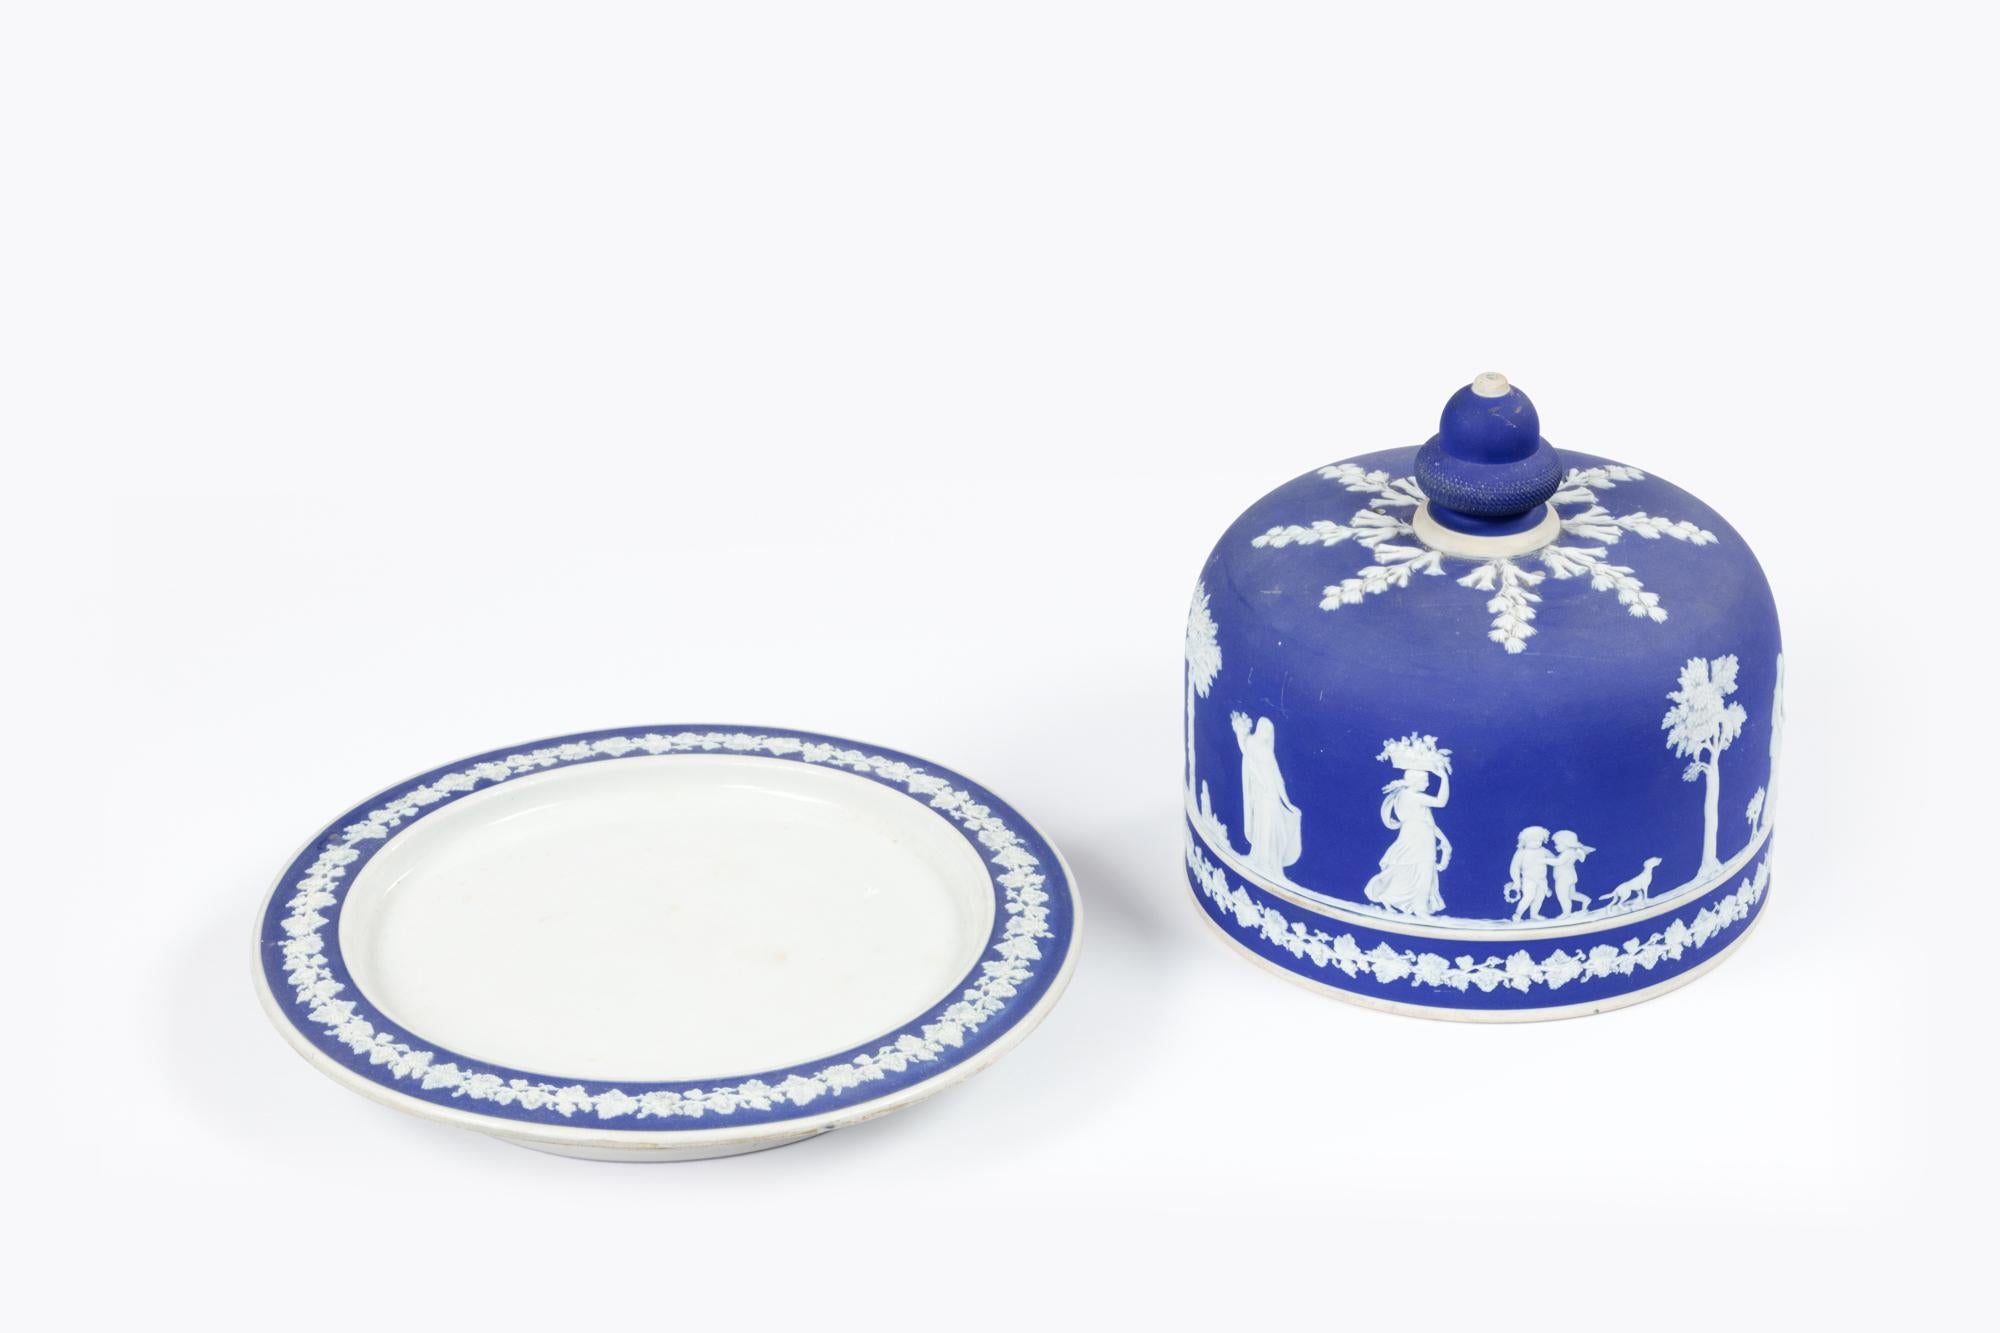 Heavy Wedgewood cobalt blue Jasperware cheese plate with dome.

The applied white bas relief depicts classical figural scenes with foliate motif against the distinctive ‘Adams blue’ ground.